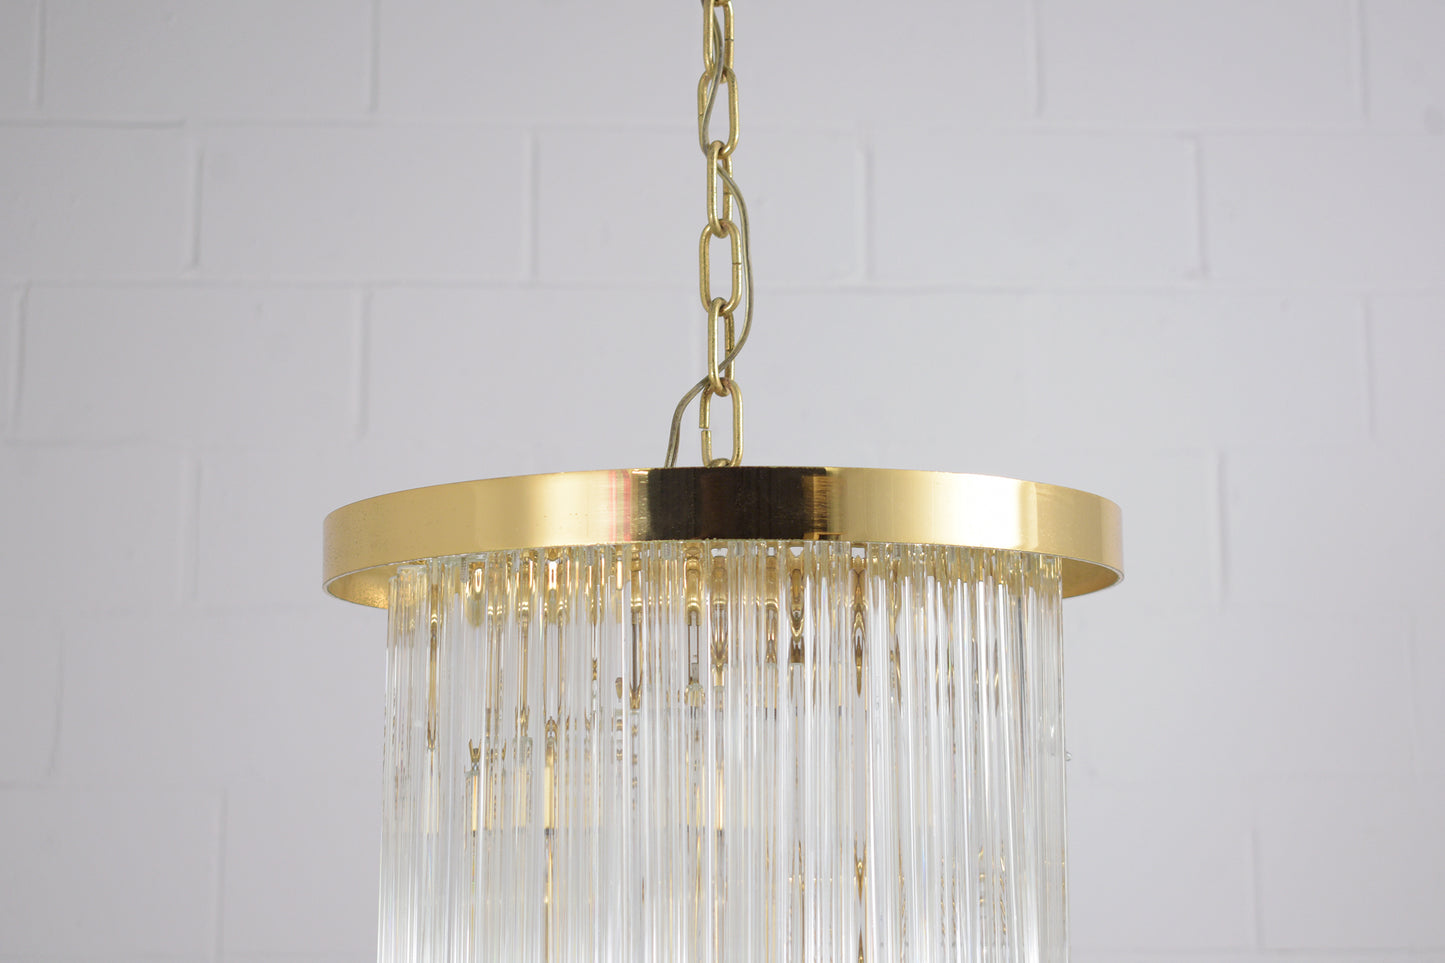 Vintage Drop Pendant Chandeliers: Timeless Elegance in Brass and Glass